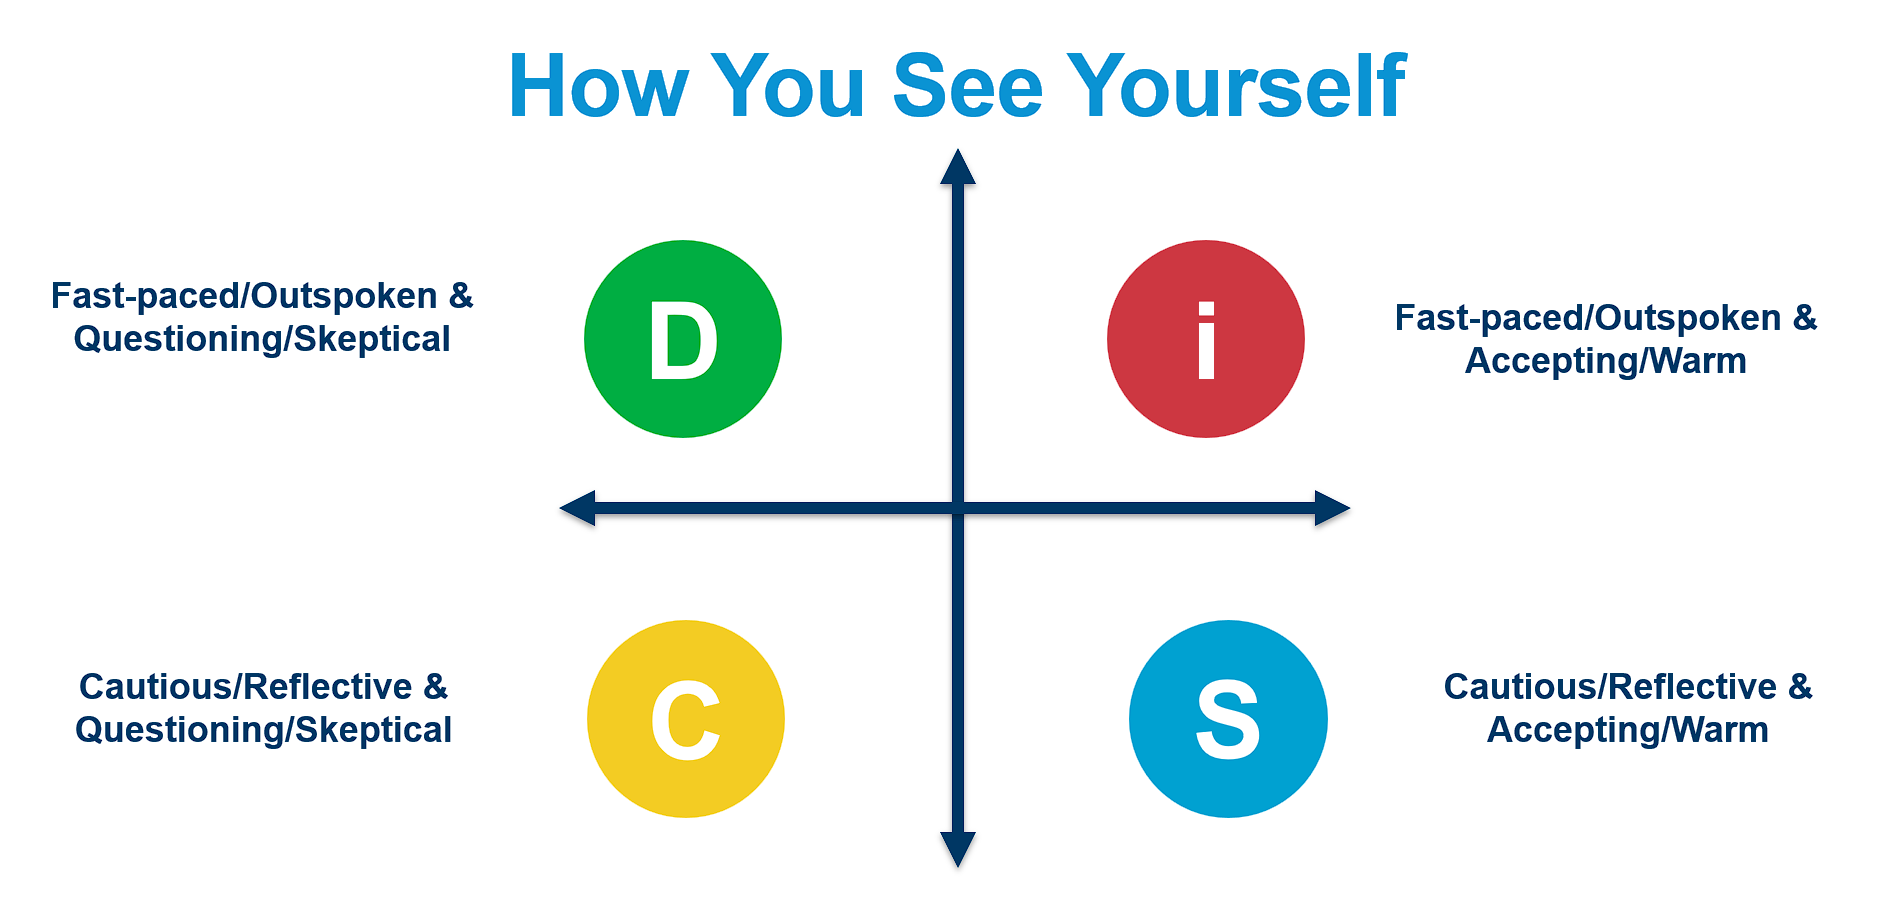 Everything DiSC Personality Assessment and Certification NYC NJ DC